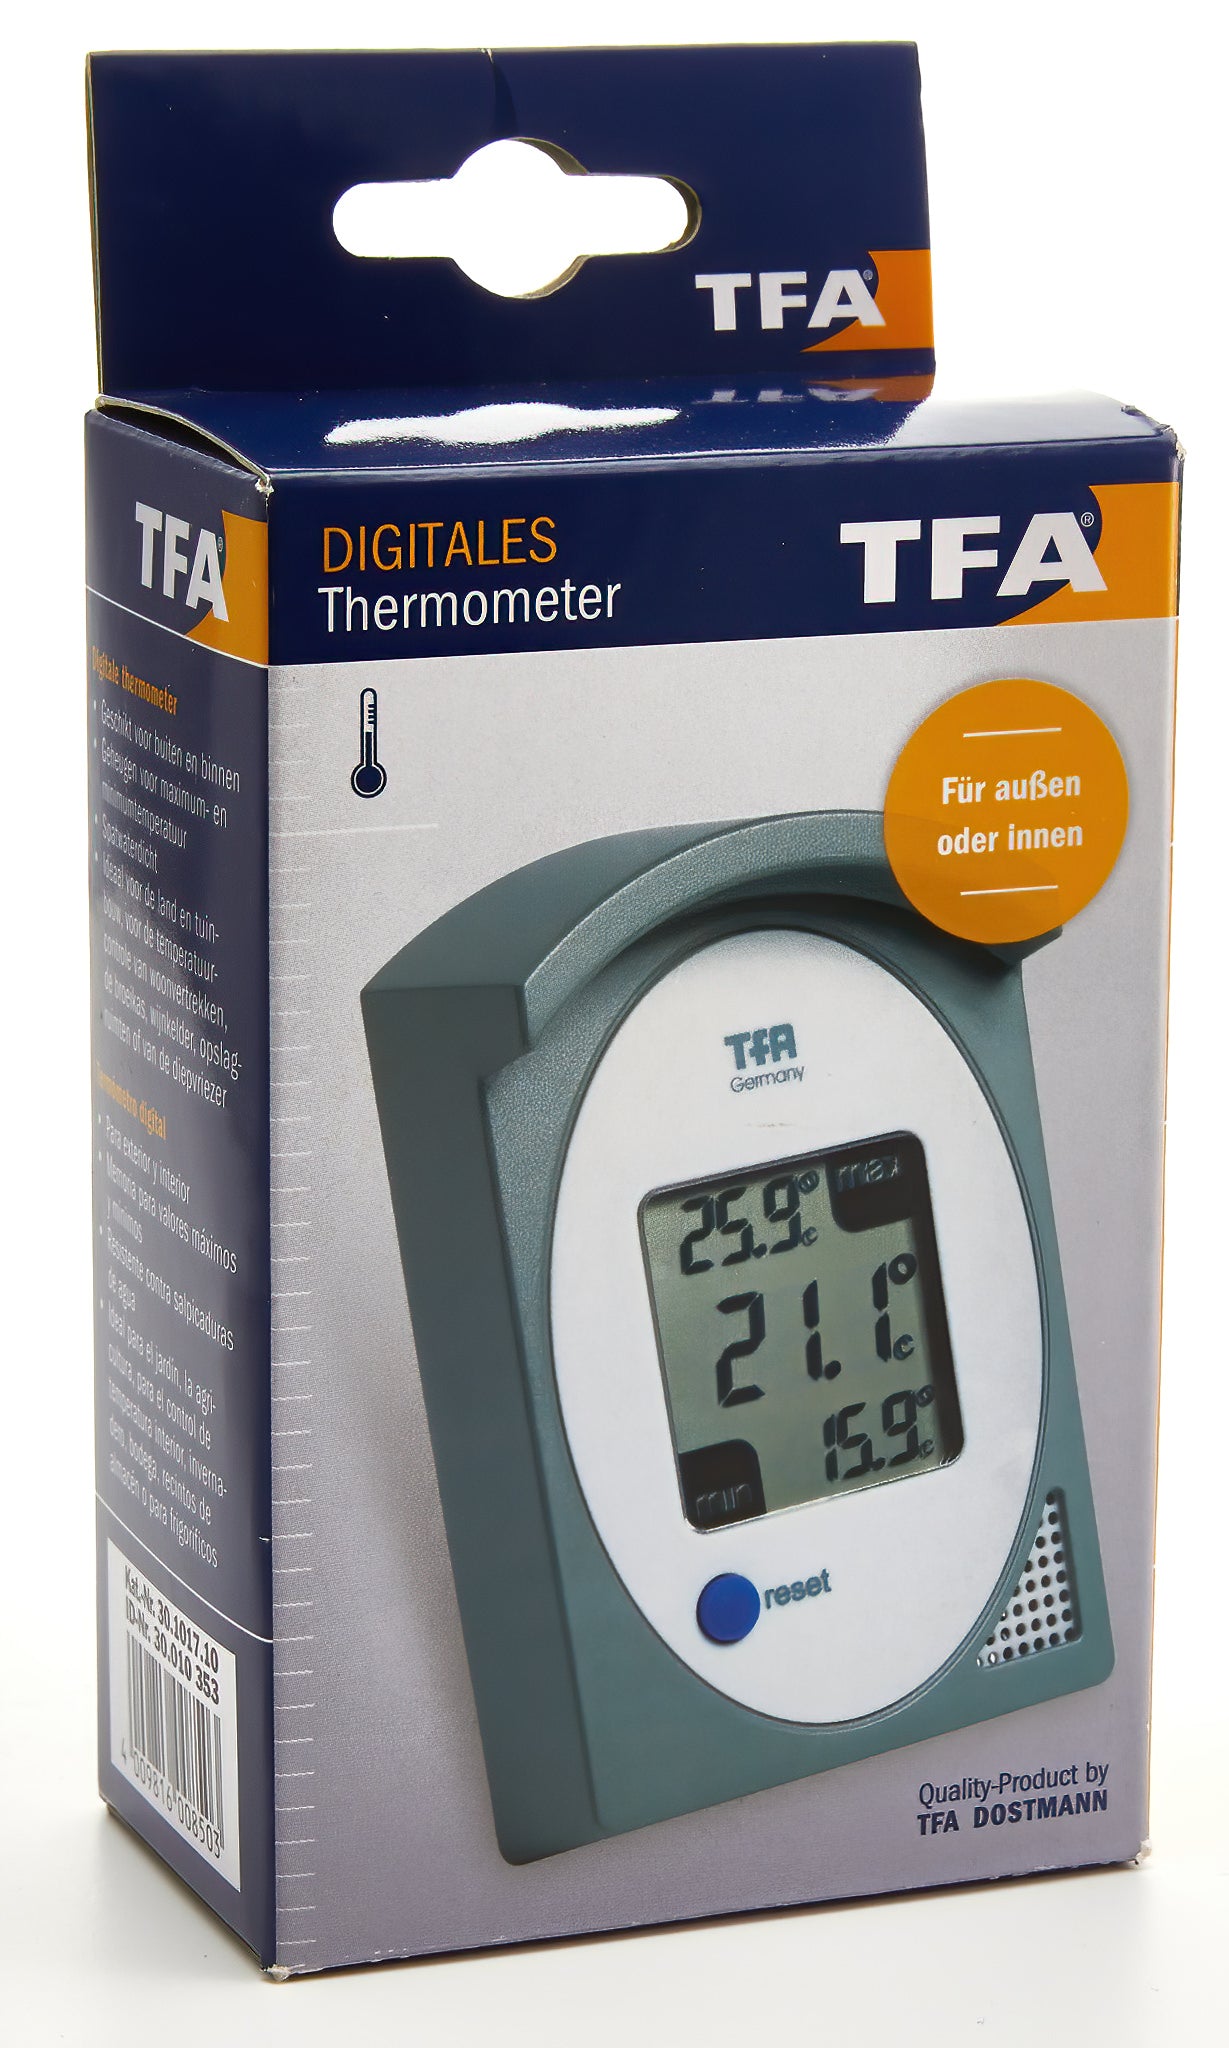 Forestry Suppliers Digital Max/Min Thermometer